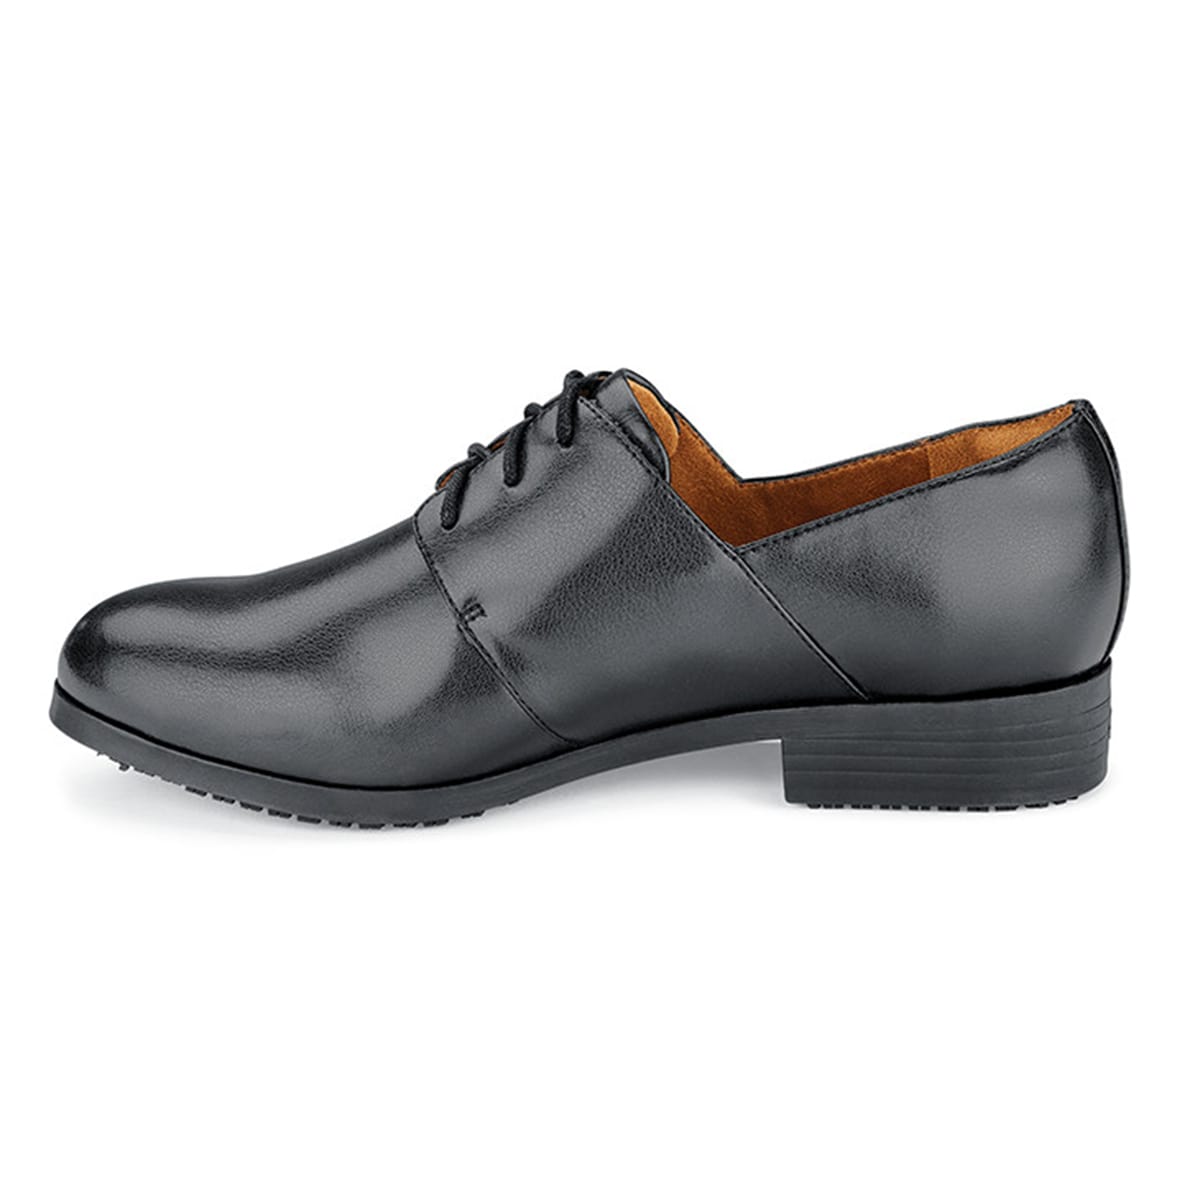 The Madison III from Shoes For Crews is an slip-resistant dress shoe designed to provide safety and security, seen from the left.